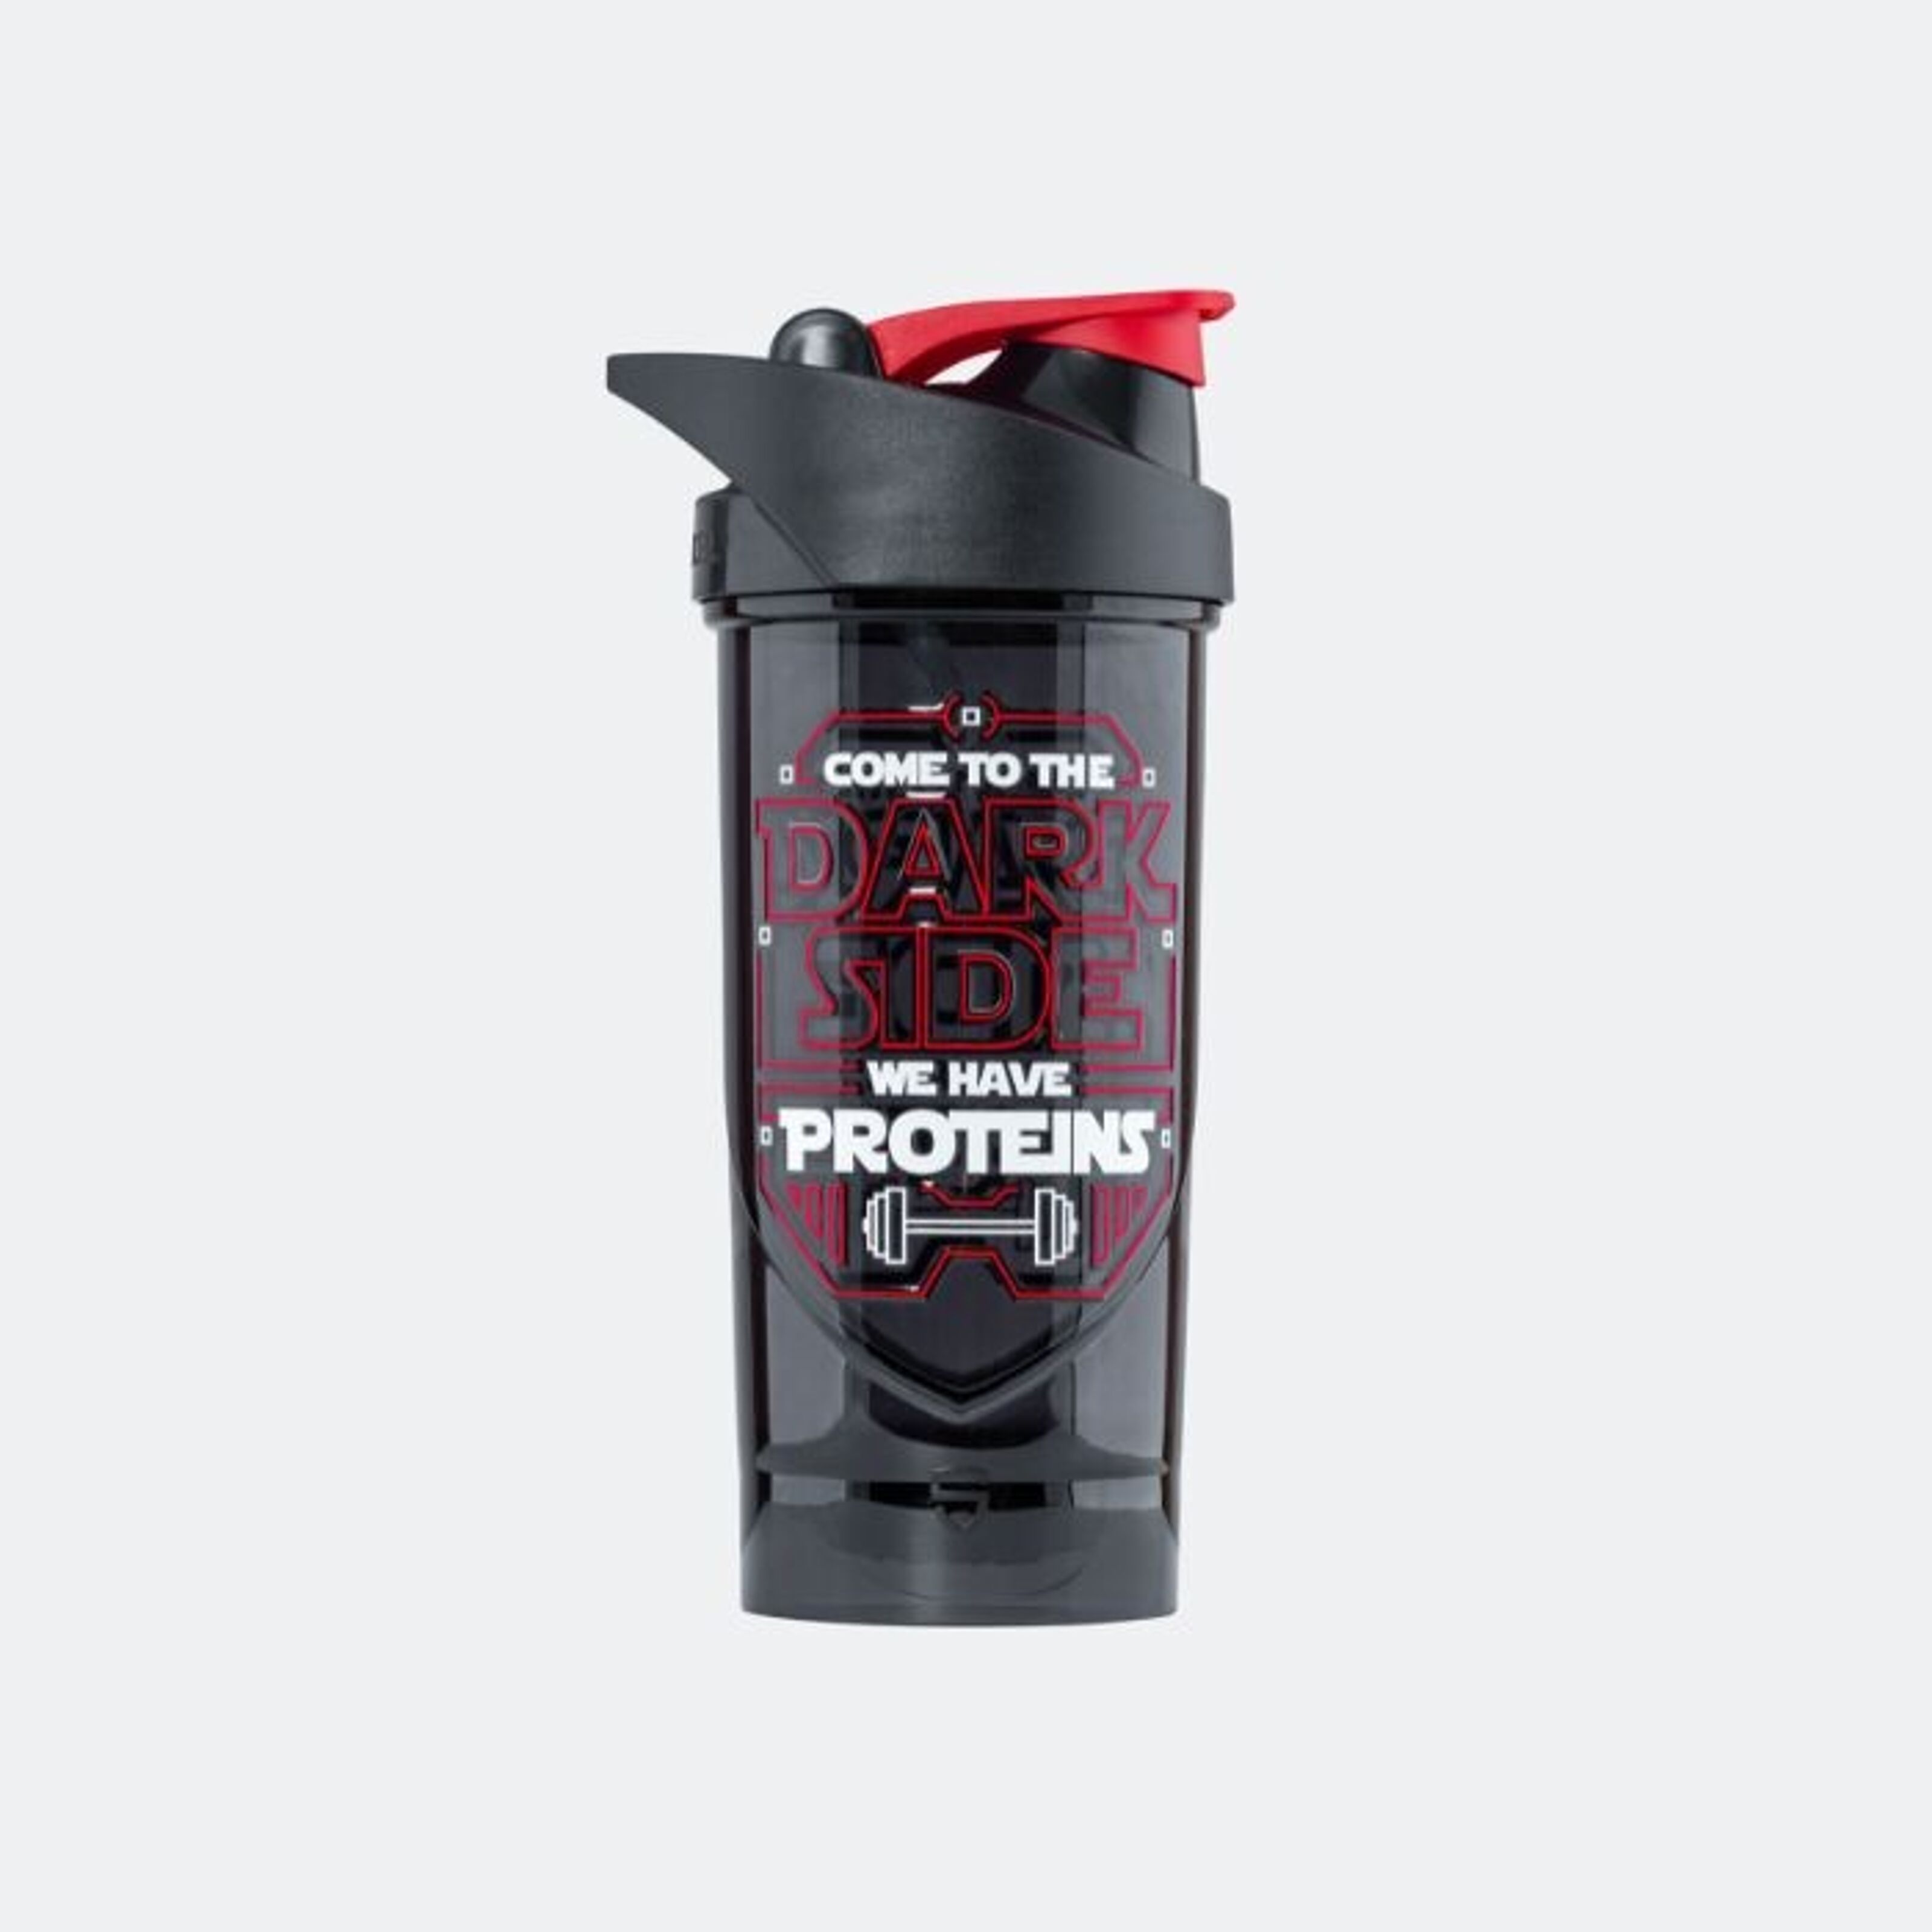 Smoothie King - Star Wars Shaker Bottle is now available at